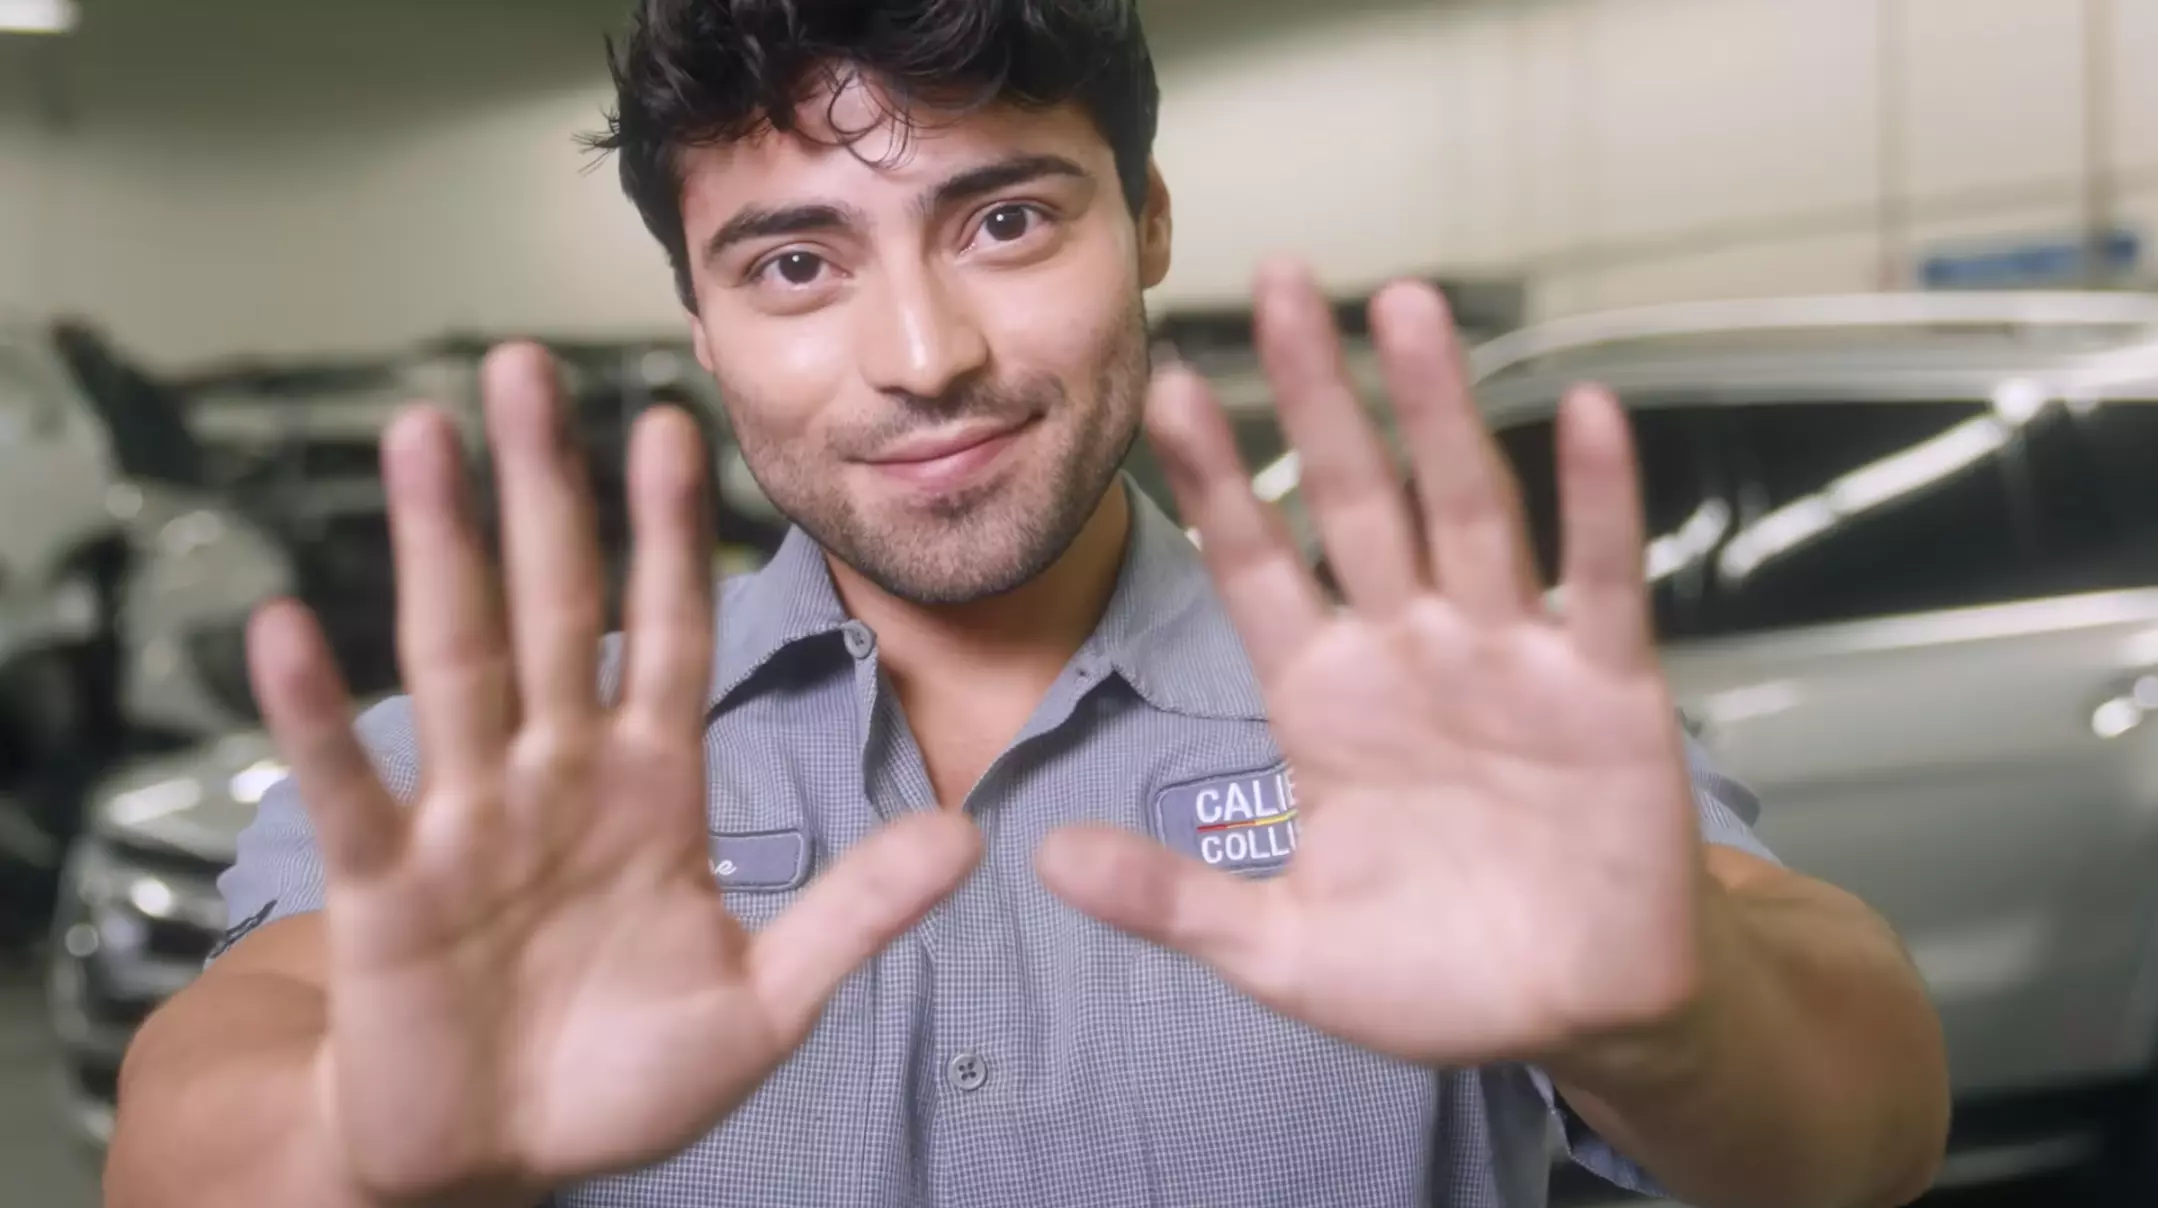 A photo of a collision technician standing in a shop, holding his hands up to the camera and out in front of him while smiling.